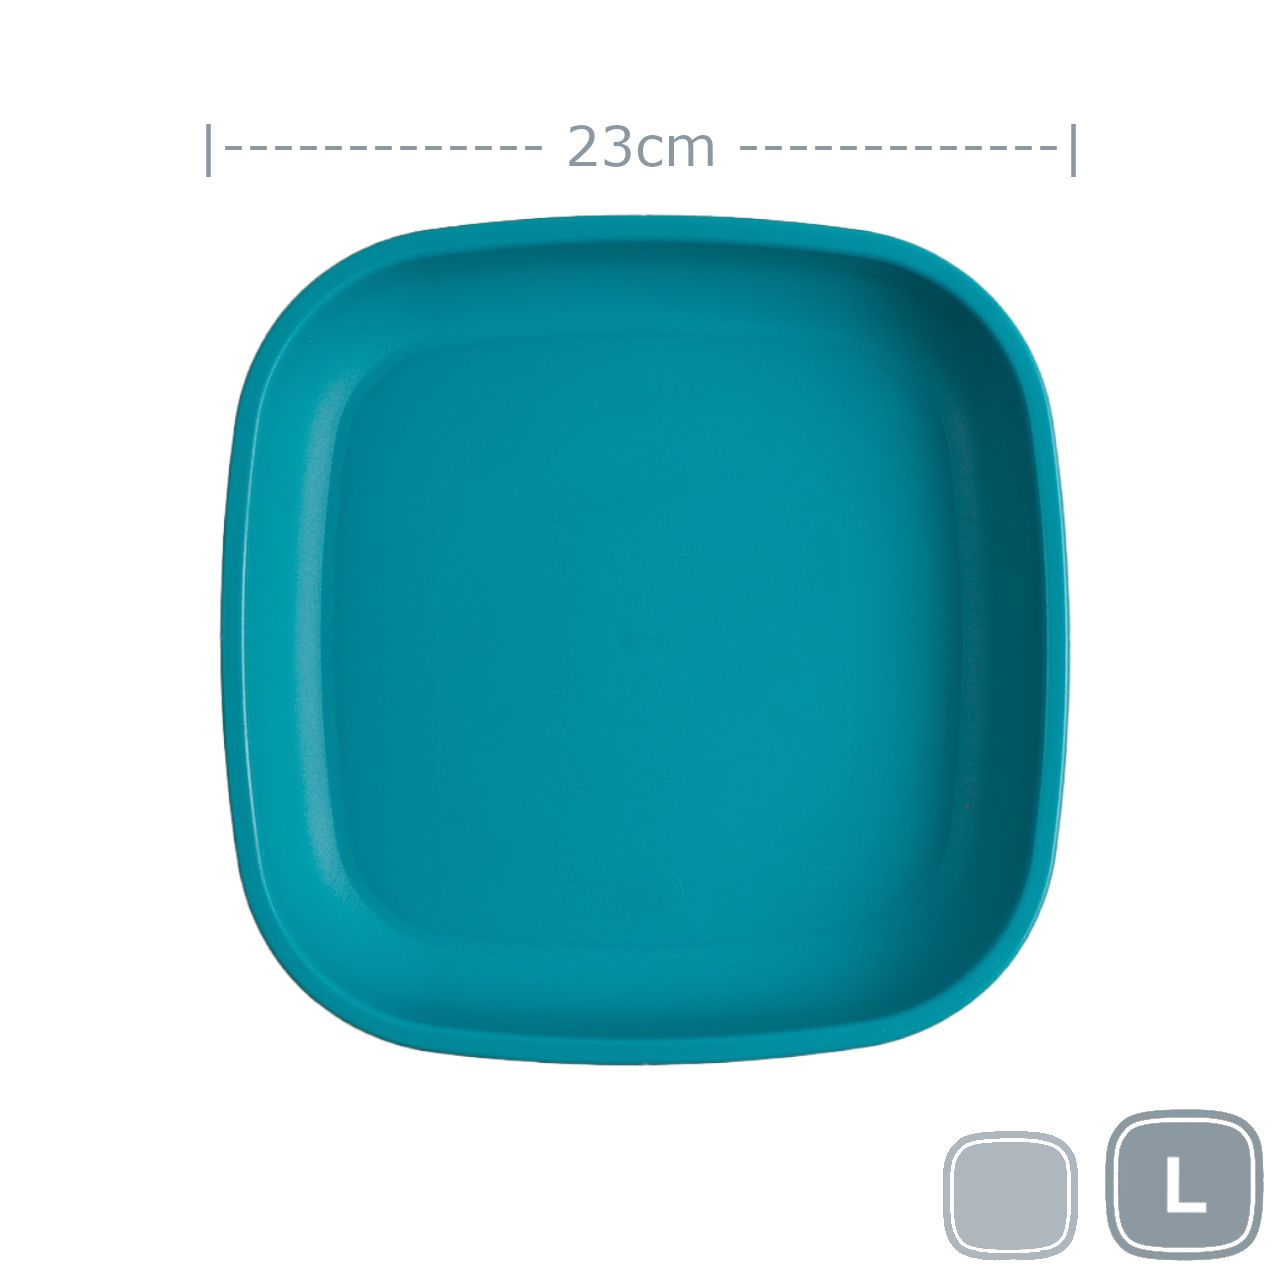 Replay Large Flat Plate - Teal